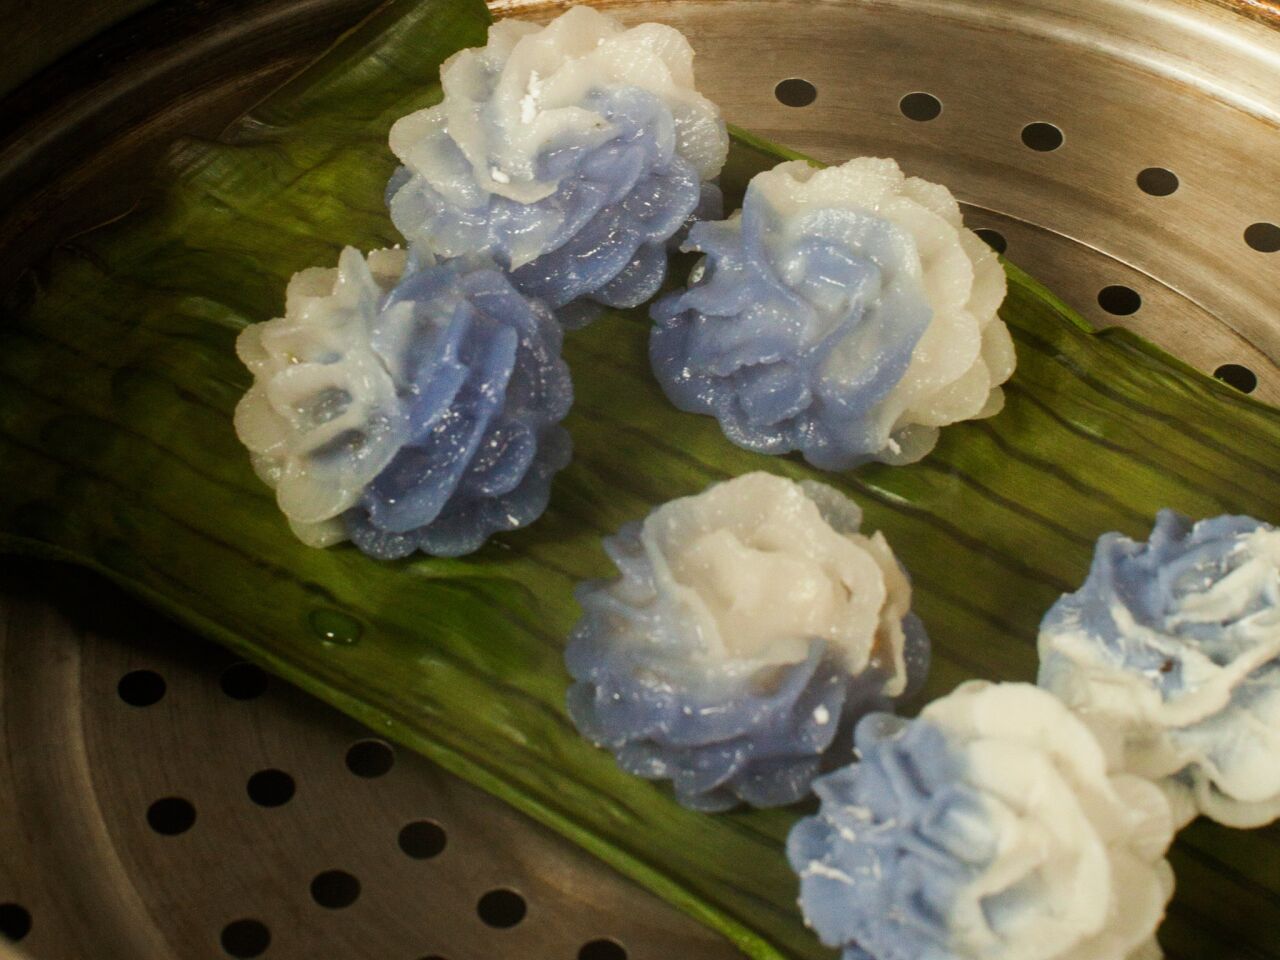 Chor mung, flower-shaped dumplings stuffed with chiken and nuts, at restaurant Galanga.